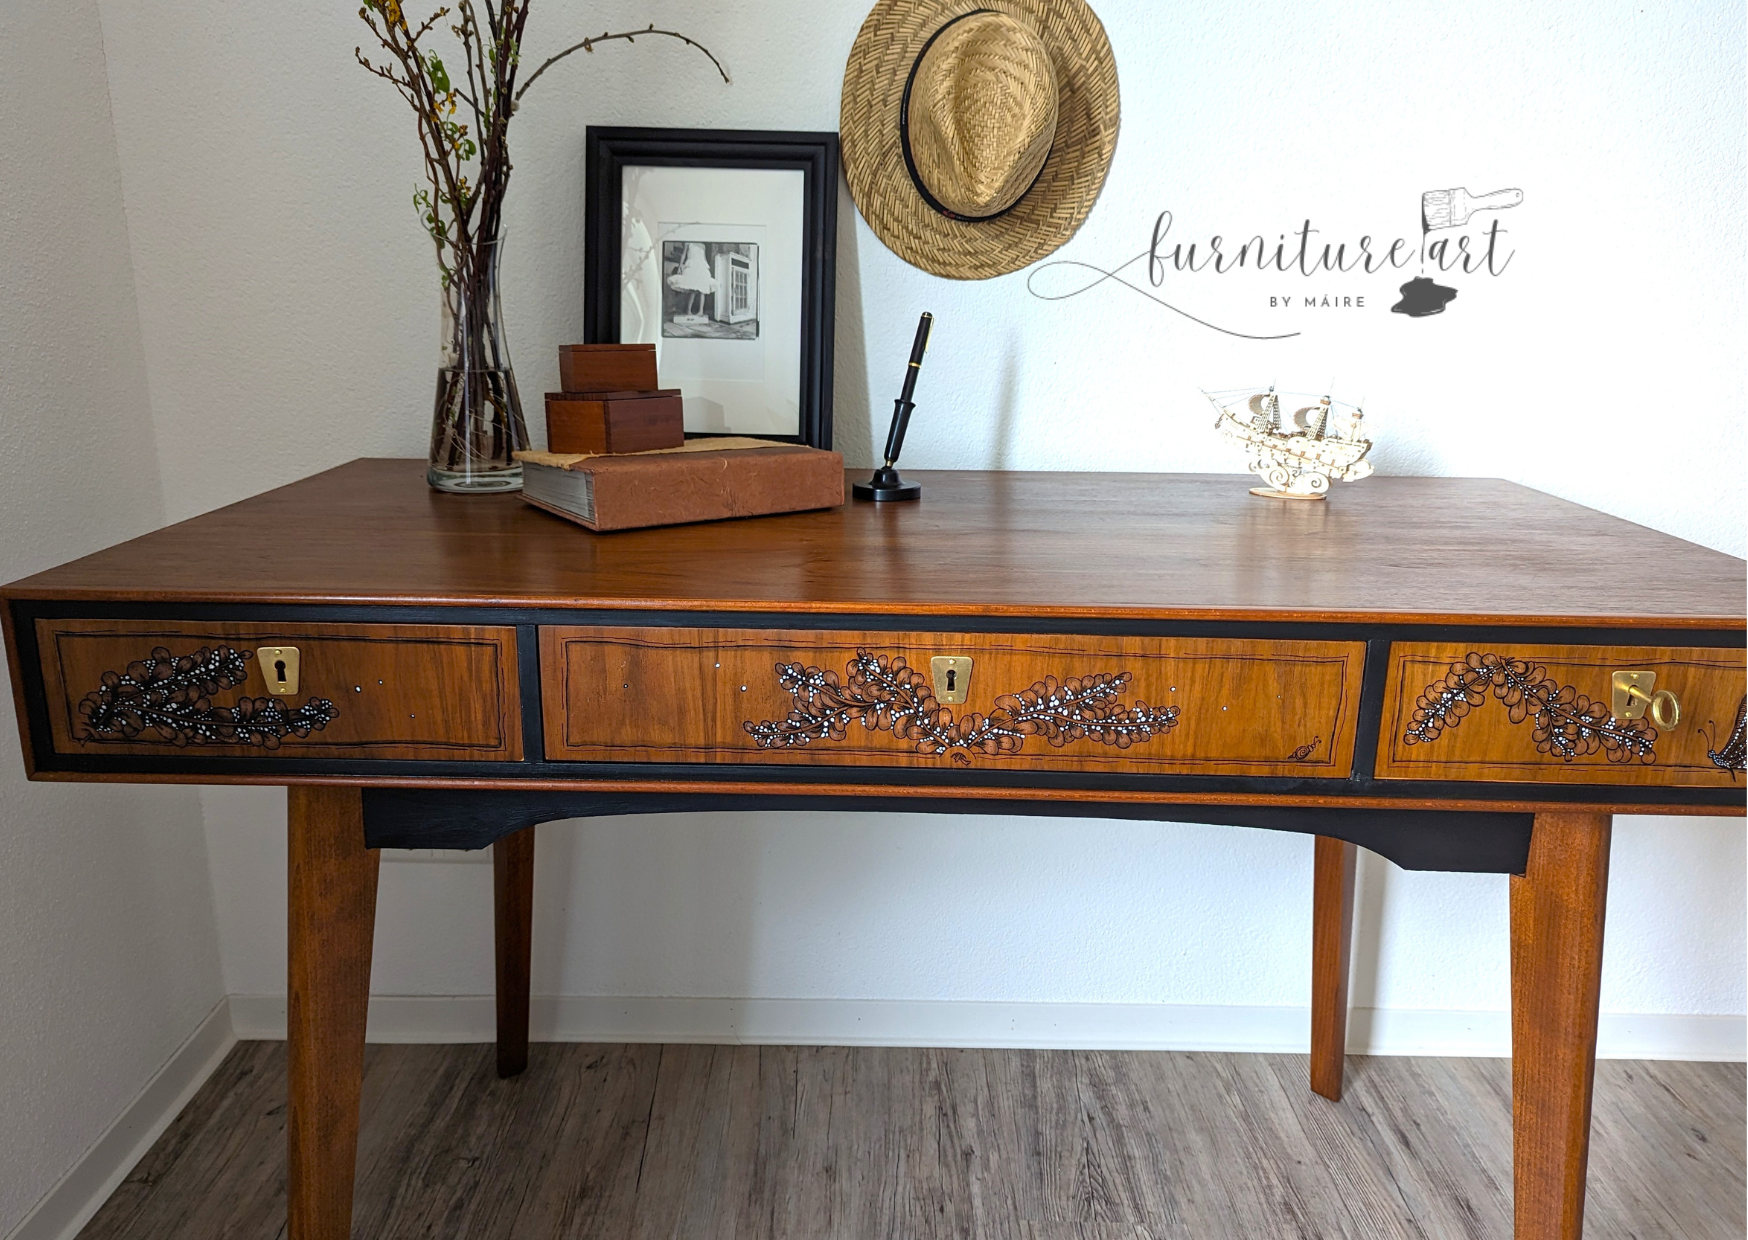 Follow My Almost Complete Guide Towards Re-imagining a Vintage Desk